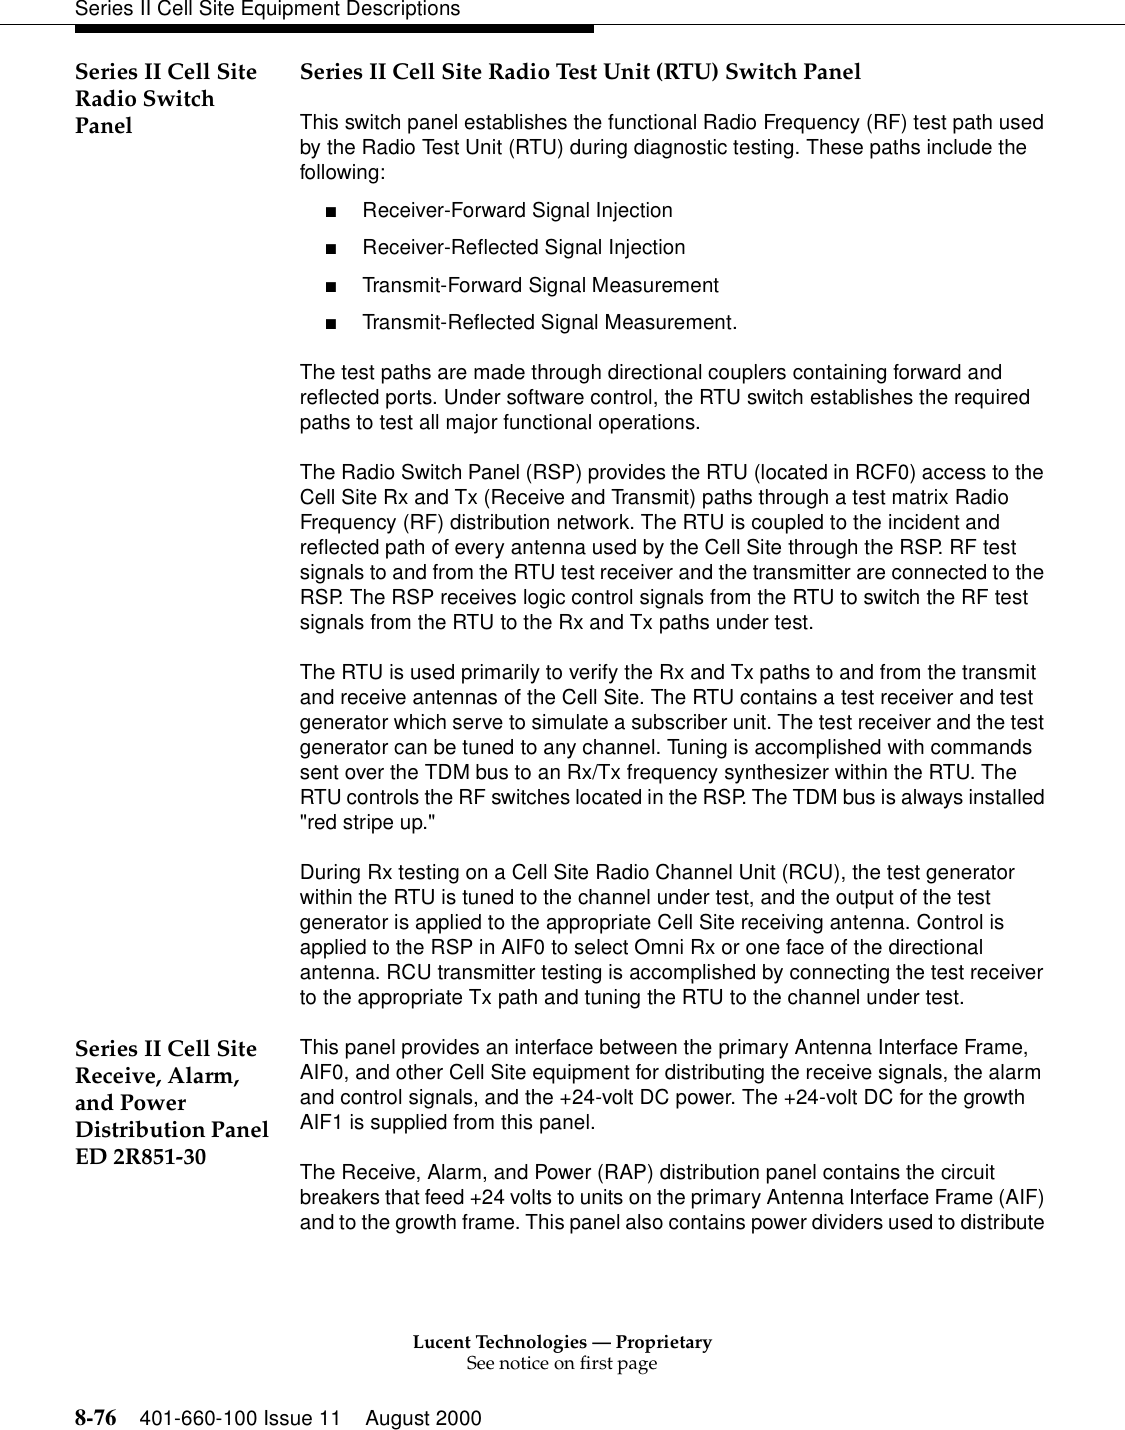 Lucent Technologies — ProprietarySee notice on first page8-76 401-660-100 Issue 11 August 2000Series II Cell Site Equipment DescriptionsSeries II Cell Site Radio Switch PanelSeries II Cell Site Radio Test Unit (RTU) Switch PanelThis switch panel establishes the functional Radio Frequency (RF) test path used by the Radio Test Unit (RTU) during diagnostic testing. These paths include the following:■Receiver-Forward Signal Injection■Receiver-Reflected Signal Injection■Transmit-Forward Signal Measurement■Transmit-Reflected Signal Measurement.The test paths are made through directional couplers containing forward and reflected ports. Under software control, the RTU switch establishes the required paths to test all major functional operations.The Radio Switch Panel (RSP) provides the RTU (located in RCF0) access to the Cell Site Rx and Tx (Receive and Transmit) paths through a test matrix Radio Frequency (RF) distribution network. The RTU is coupled to the incident and reflected path of every antenna used by the Cell Site through the RSP. RF test signals to and from the RTU test receiver and the transmitter are connected to the RSP. The RSP receives logic control signals from the RTU to switch the RF test signals from the RTU to the Rx and Tx paths under test. The RTU is used primarily to verify the Rx and Tx paths to and from the transmit and receive antennas of the Cell Site. The RTU contains a test receiver and test generator which serve to simulate a subscriber unit. The test receiver and the test generator can be tuned to any channel. Tuning is accomplished with commands sent over the TDM bus to an Rx/Tx frequency synthesizer within the RTU. The RTU controls the RF switches located in the RSP. The TDM bus is always installed &quot;red stripe up.&quot;During Rx testing on a Cell Site Radio Channel Unit (RCU), the test generator within the RTU is tuned to the channel under test, and the output of the test generator is applied to the appropriate Cell Site receiving antenna. Control is applied to the RSP in AIF0 to select Omni Rx or one face of the directional antenna. RCU transmitter testing is accomplished by connecting the test receiver to the appropriate Tx path and tuning the RTU to the channel under test. Series II Cell Site Receive, Alarm, and Power Distribution Panel ED 2R851-30This panel provides an interface between the primary Antenna Interface Frame, AIF0, and other Cell Site equipment for distributing the receive signals, the alarm and control signals, and the +24-volt DC power. The +24-volt DC for the growth AIF1 is supplied from this panel.The Receive, Alarm, and Power (RAP) distribution panel contains the circuit breakers that feed +24 volts to units on the primary Antenna Interface Frame (AIF) and to the growth frame. This panel also contains power dividers used to distribute 